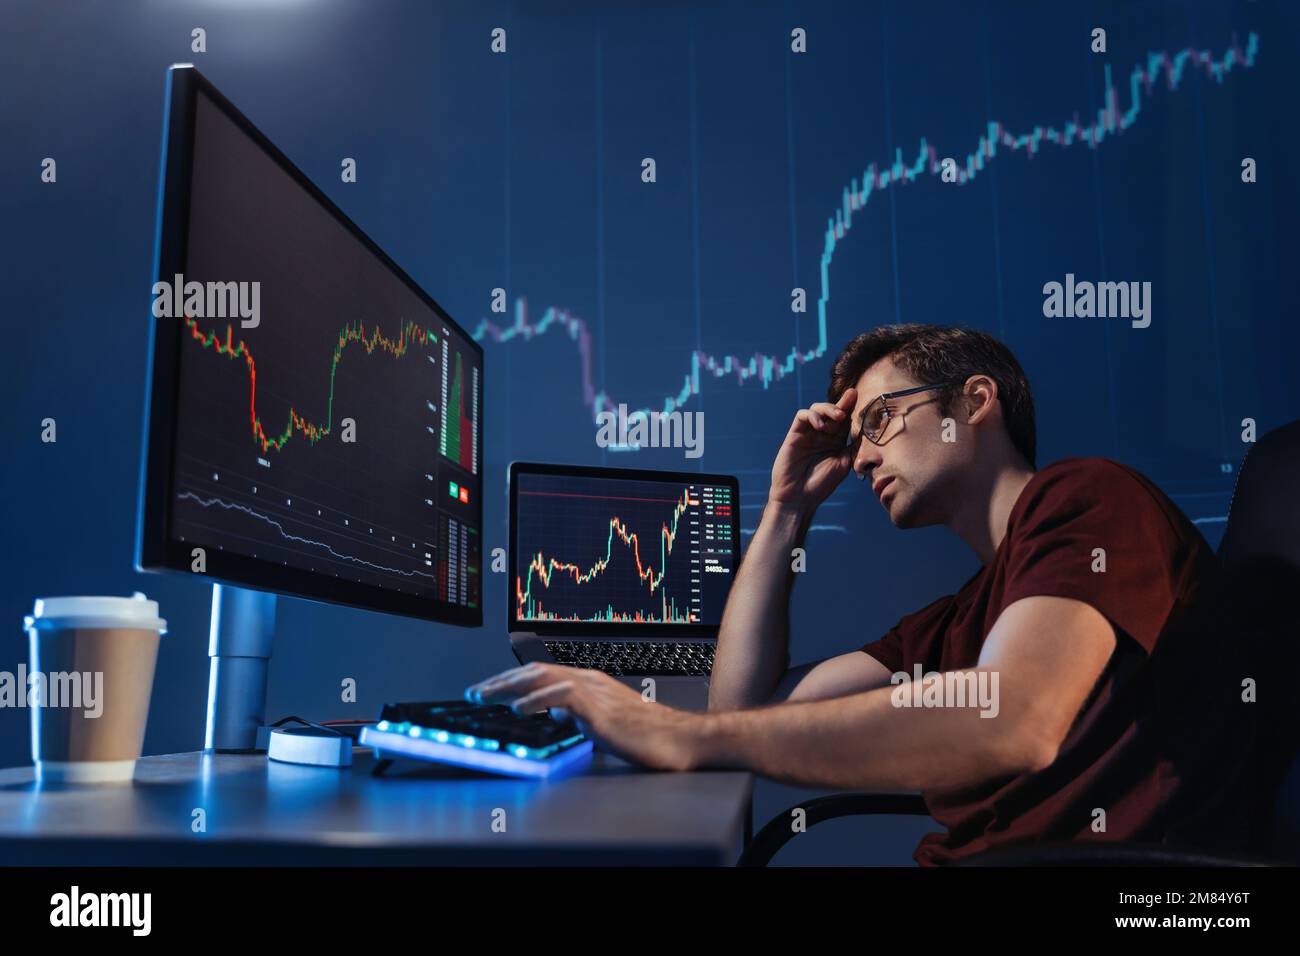 Crypto trader investor looking at computer screen with candlestick chart late night, thinking about global risks of online stock exchange market, upset with global recession and loss of money Stock Photo